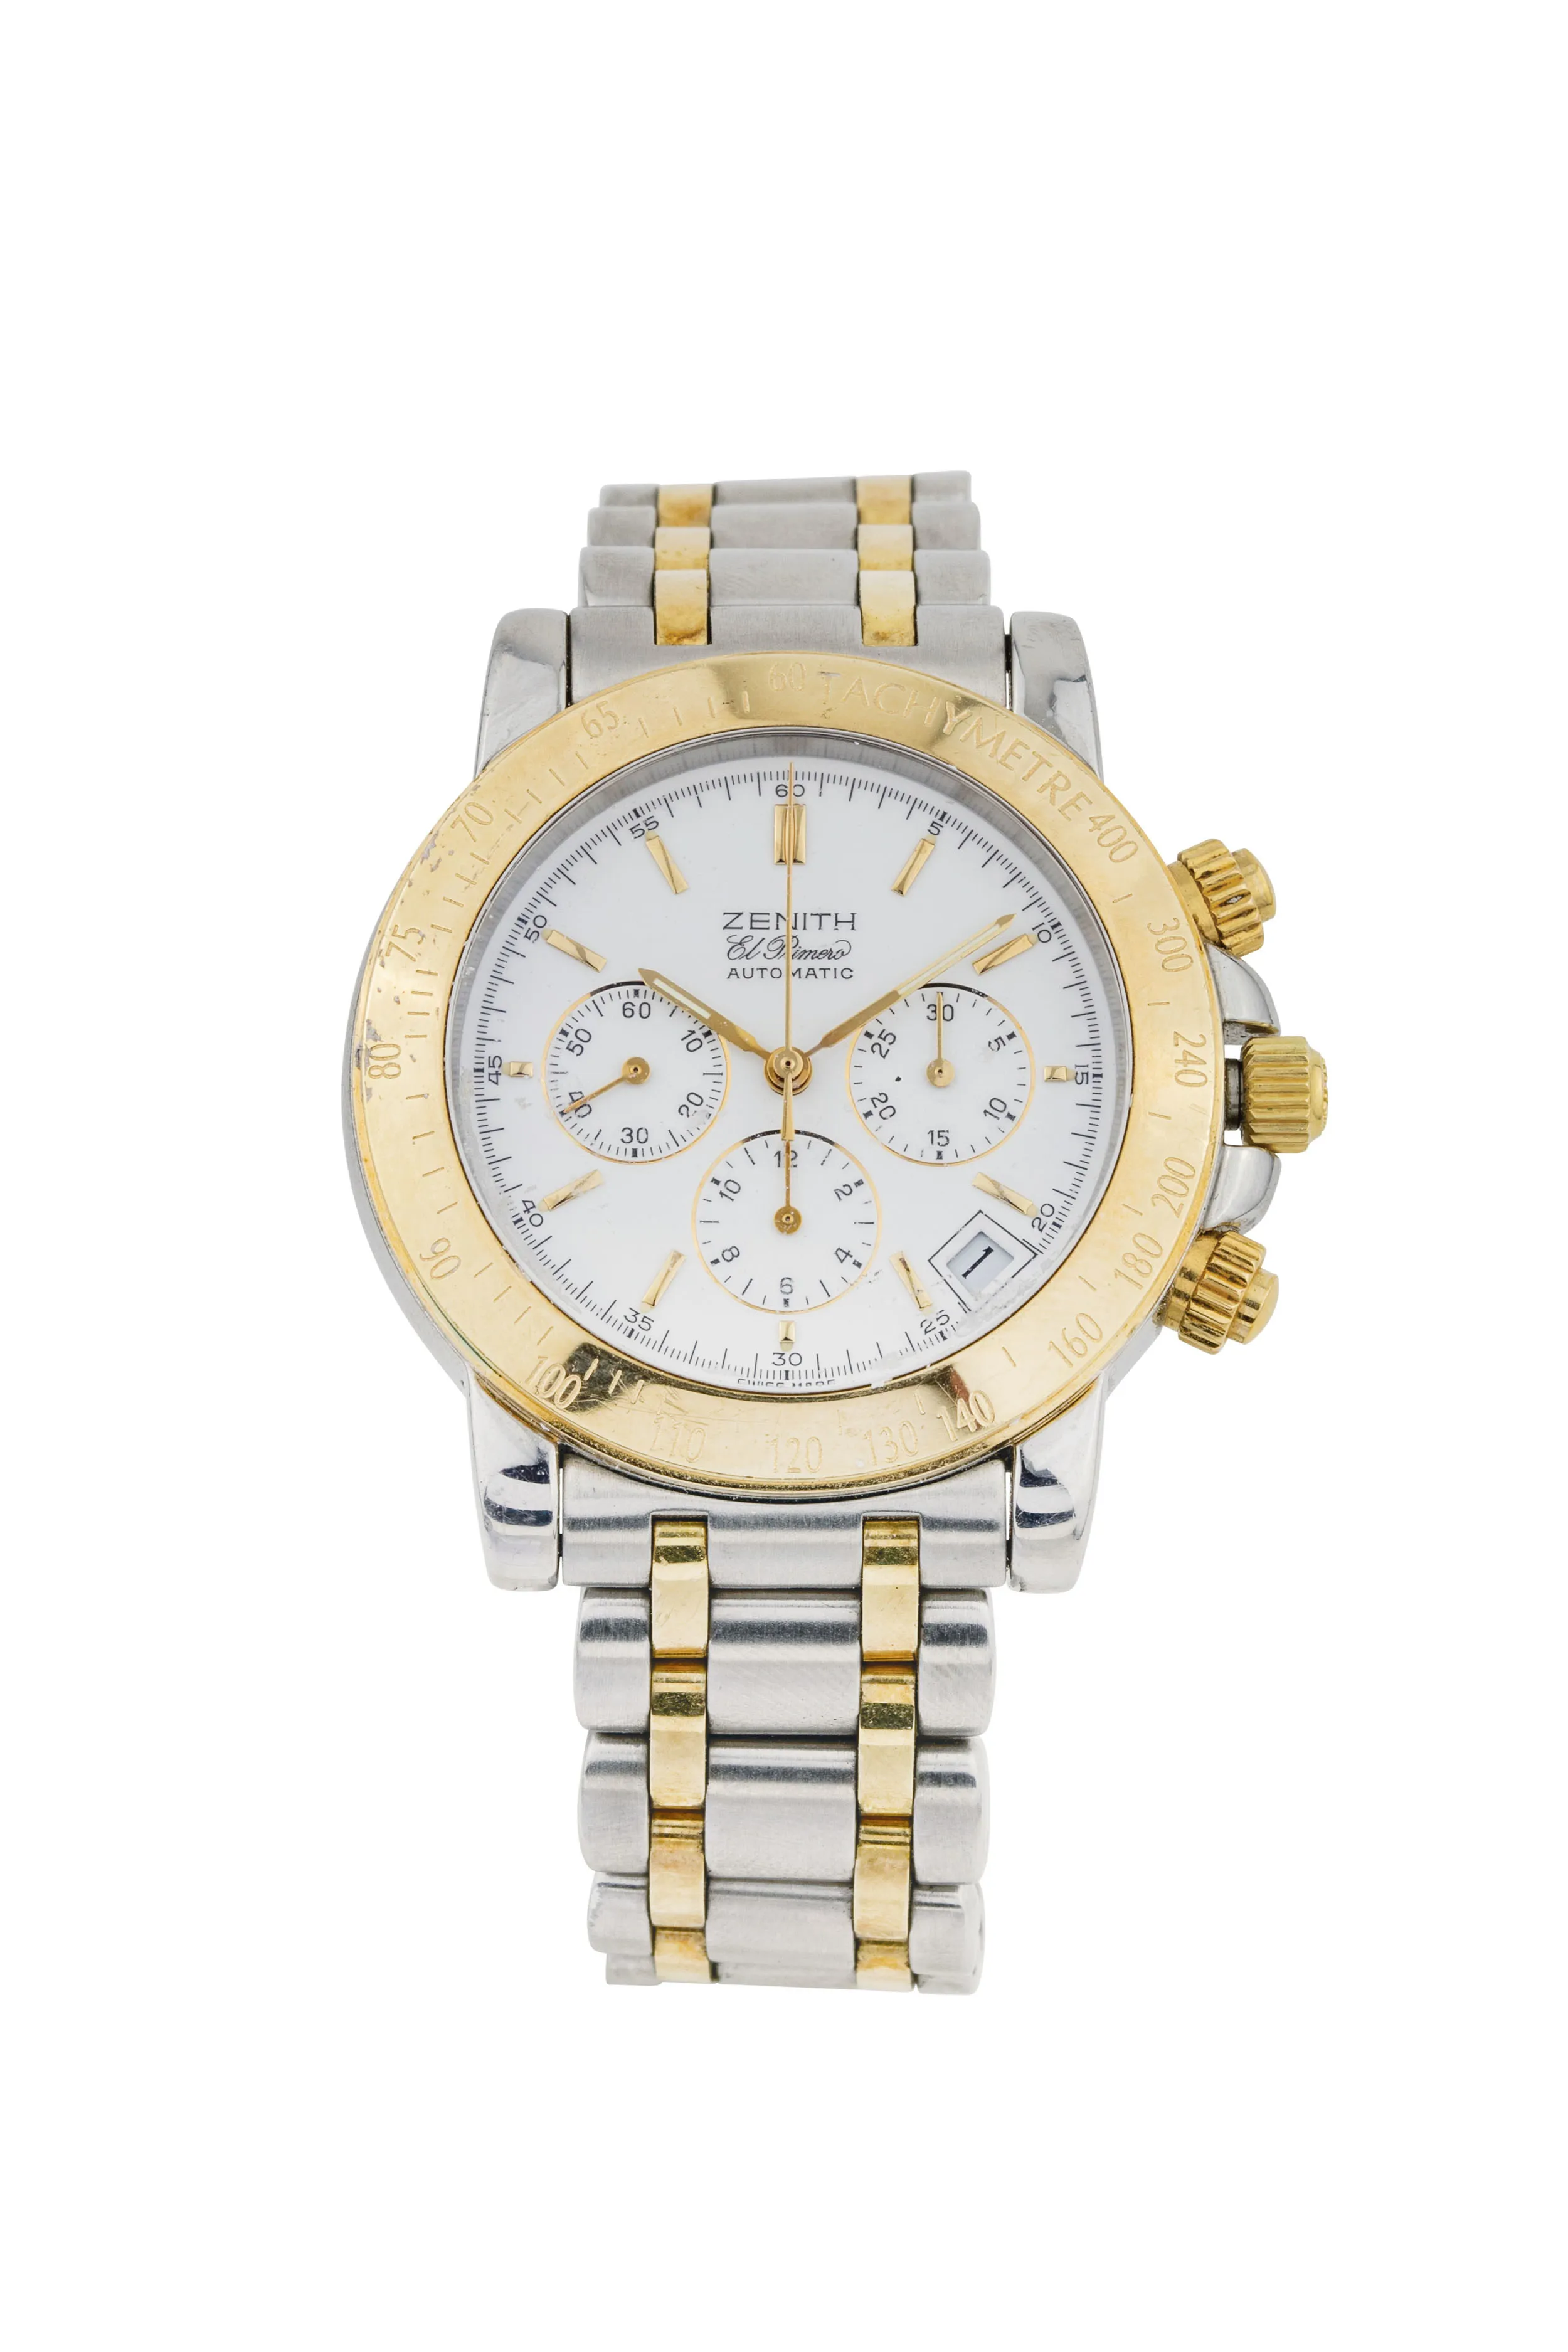 Zenith El Primero 58.0360.400 40mm Yellow gold and stainless steel